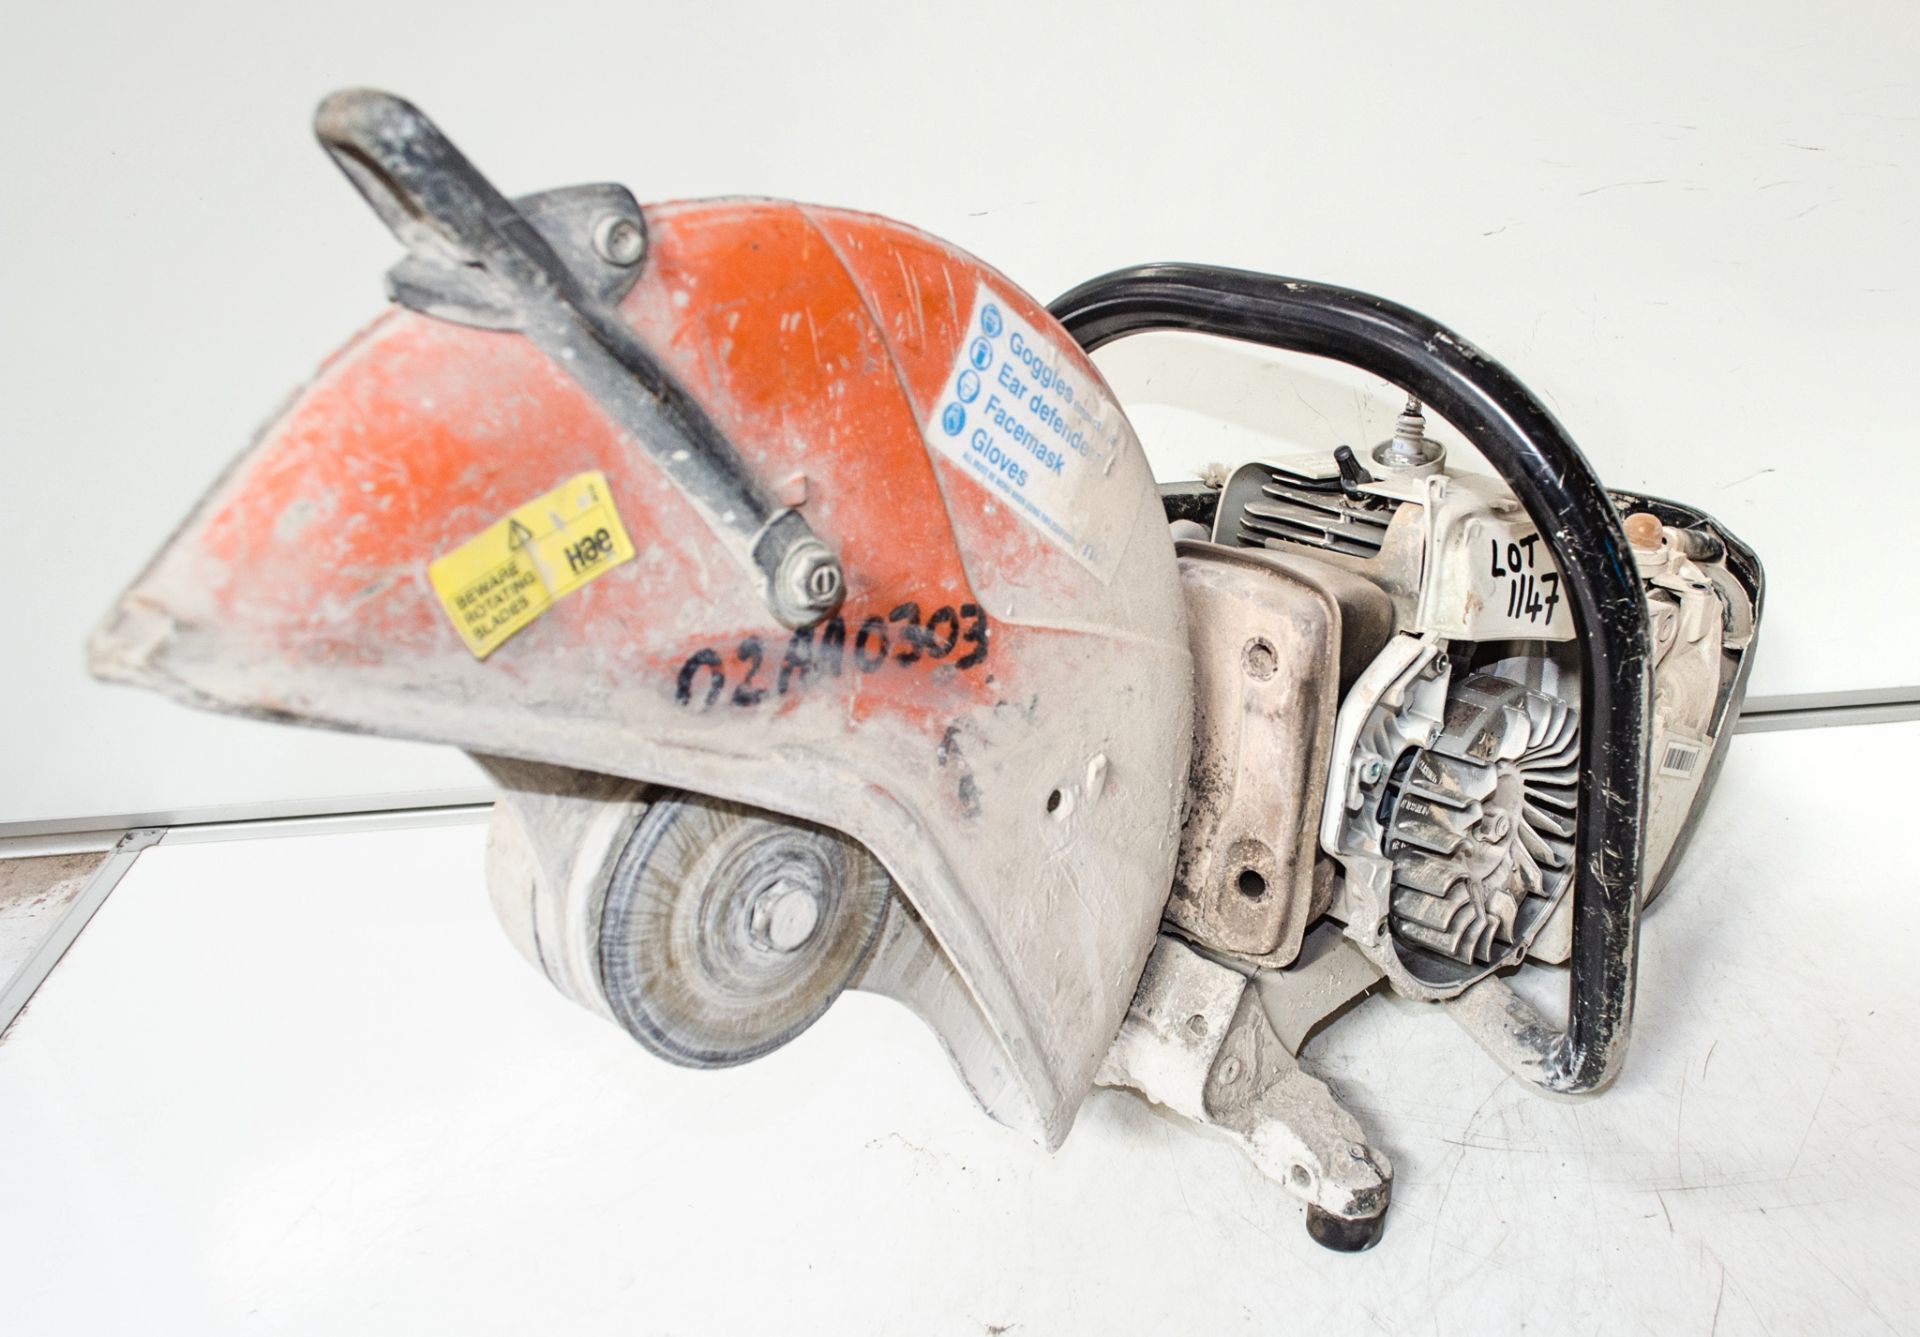 Stihl TS410 petrol driven cut off saw ** Cover and other parts missing ** 02AA0303